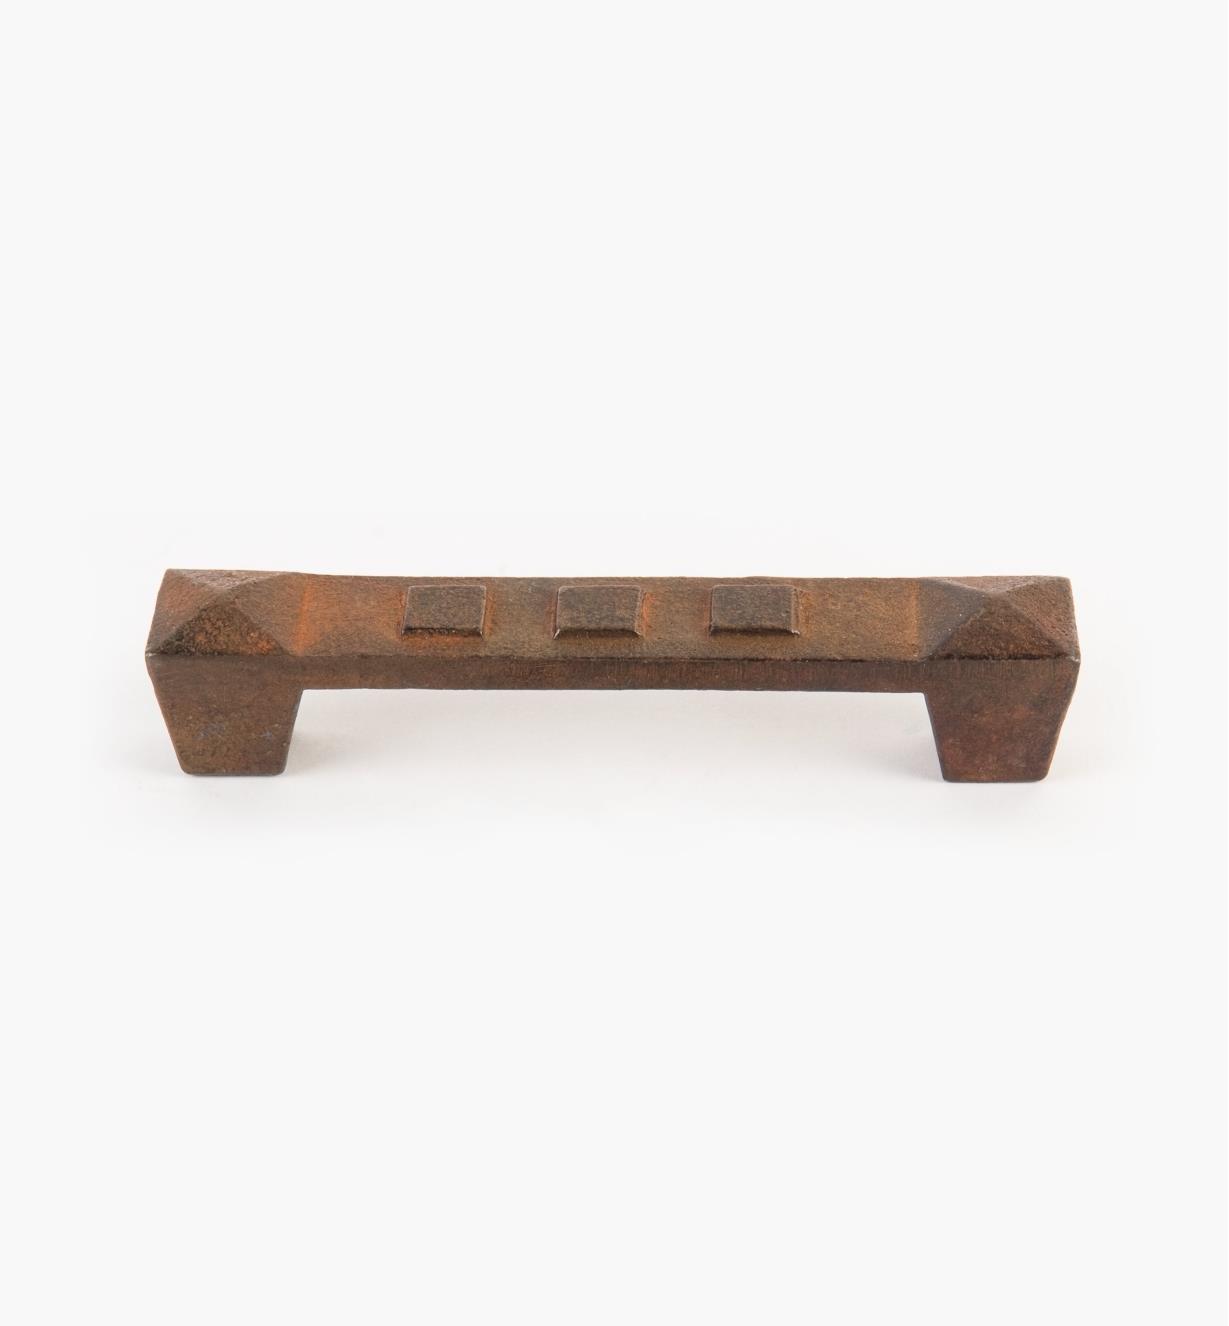 01X1921 - Rustic Mission Series - 96mm x 25mm Rusted Iron Handle